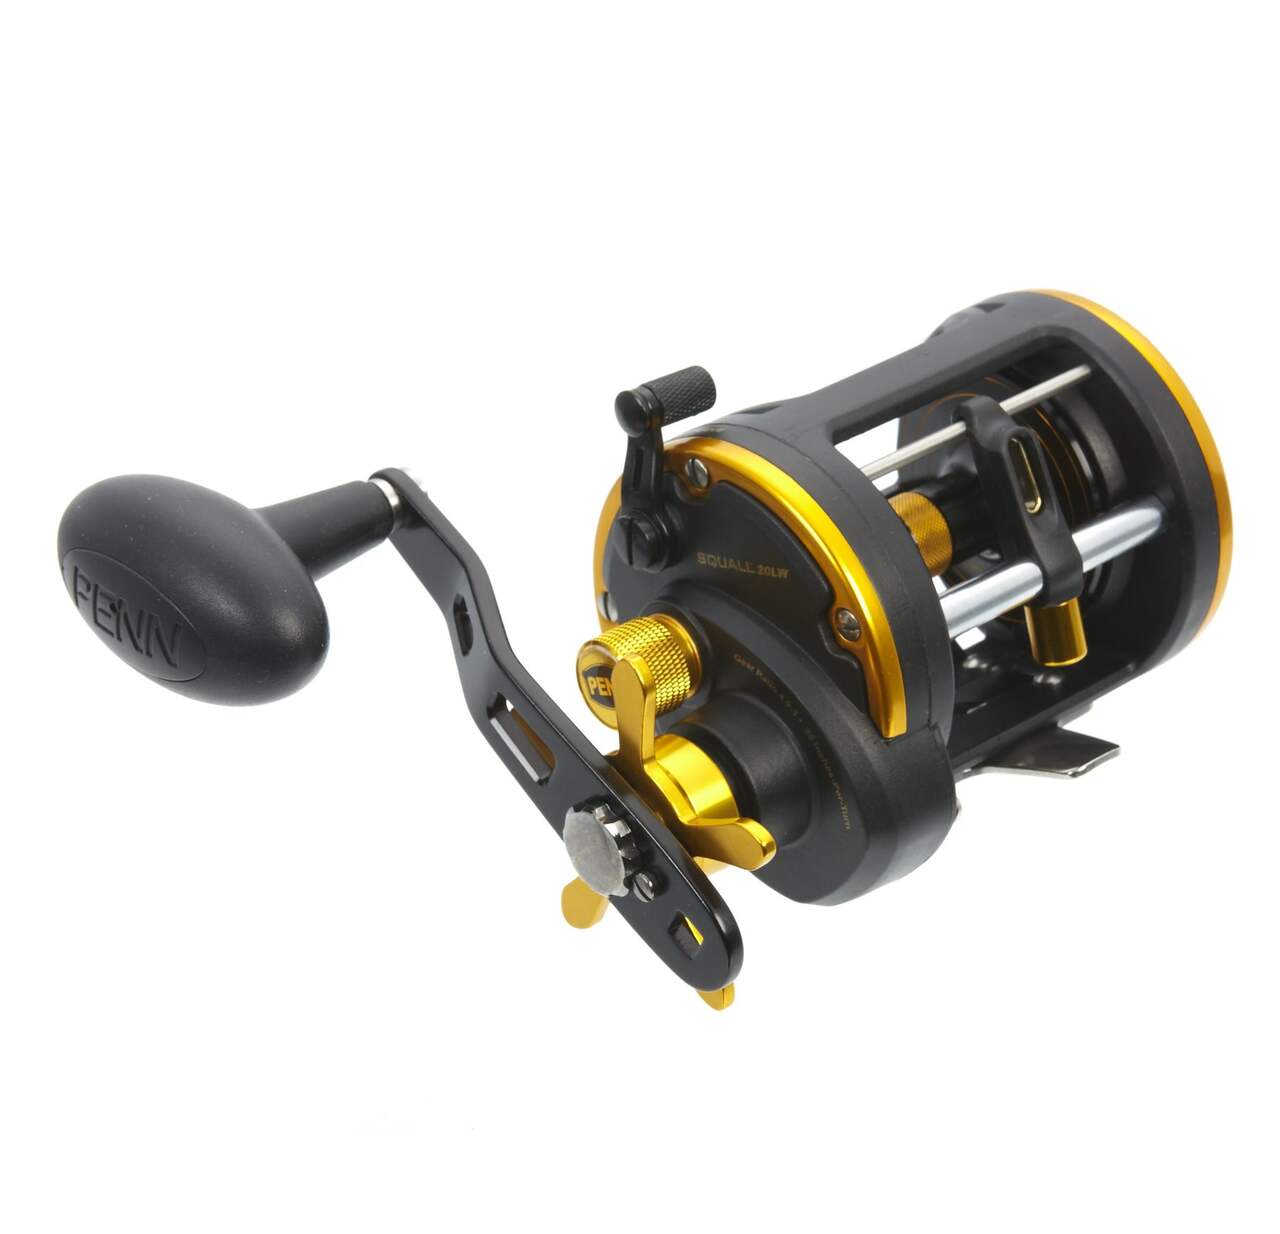 https://media-www.canadiantire.ca/product/playing/fishing/fishing-equipment/0775229/penn-squall-level-wind-reel-size-20-e7d01853-4e46-4058-a186-3b67e3103391-jpgrendition.jpg?imdensity=1&imwidth=1244&impolicy=mZoom